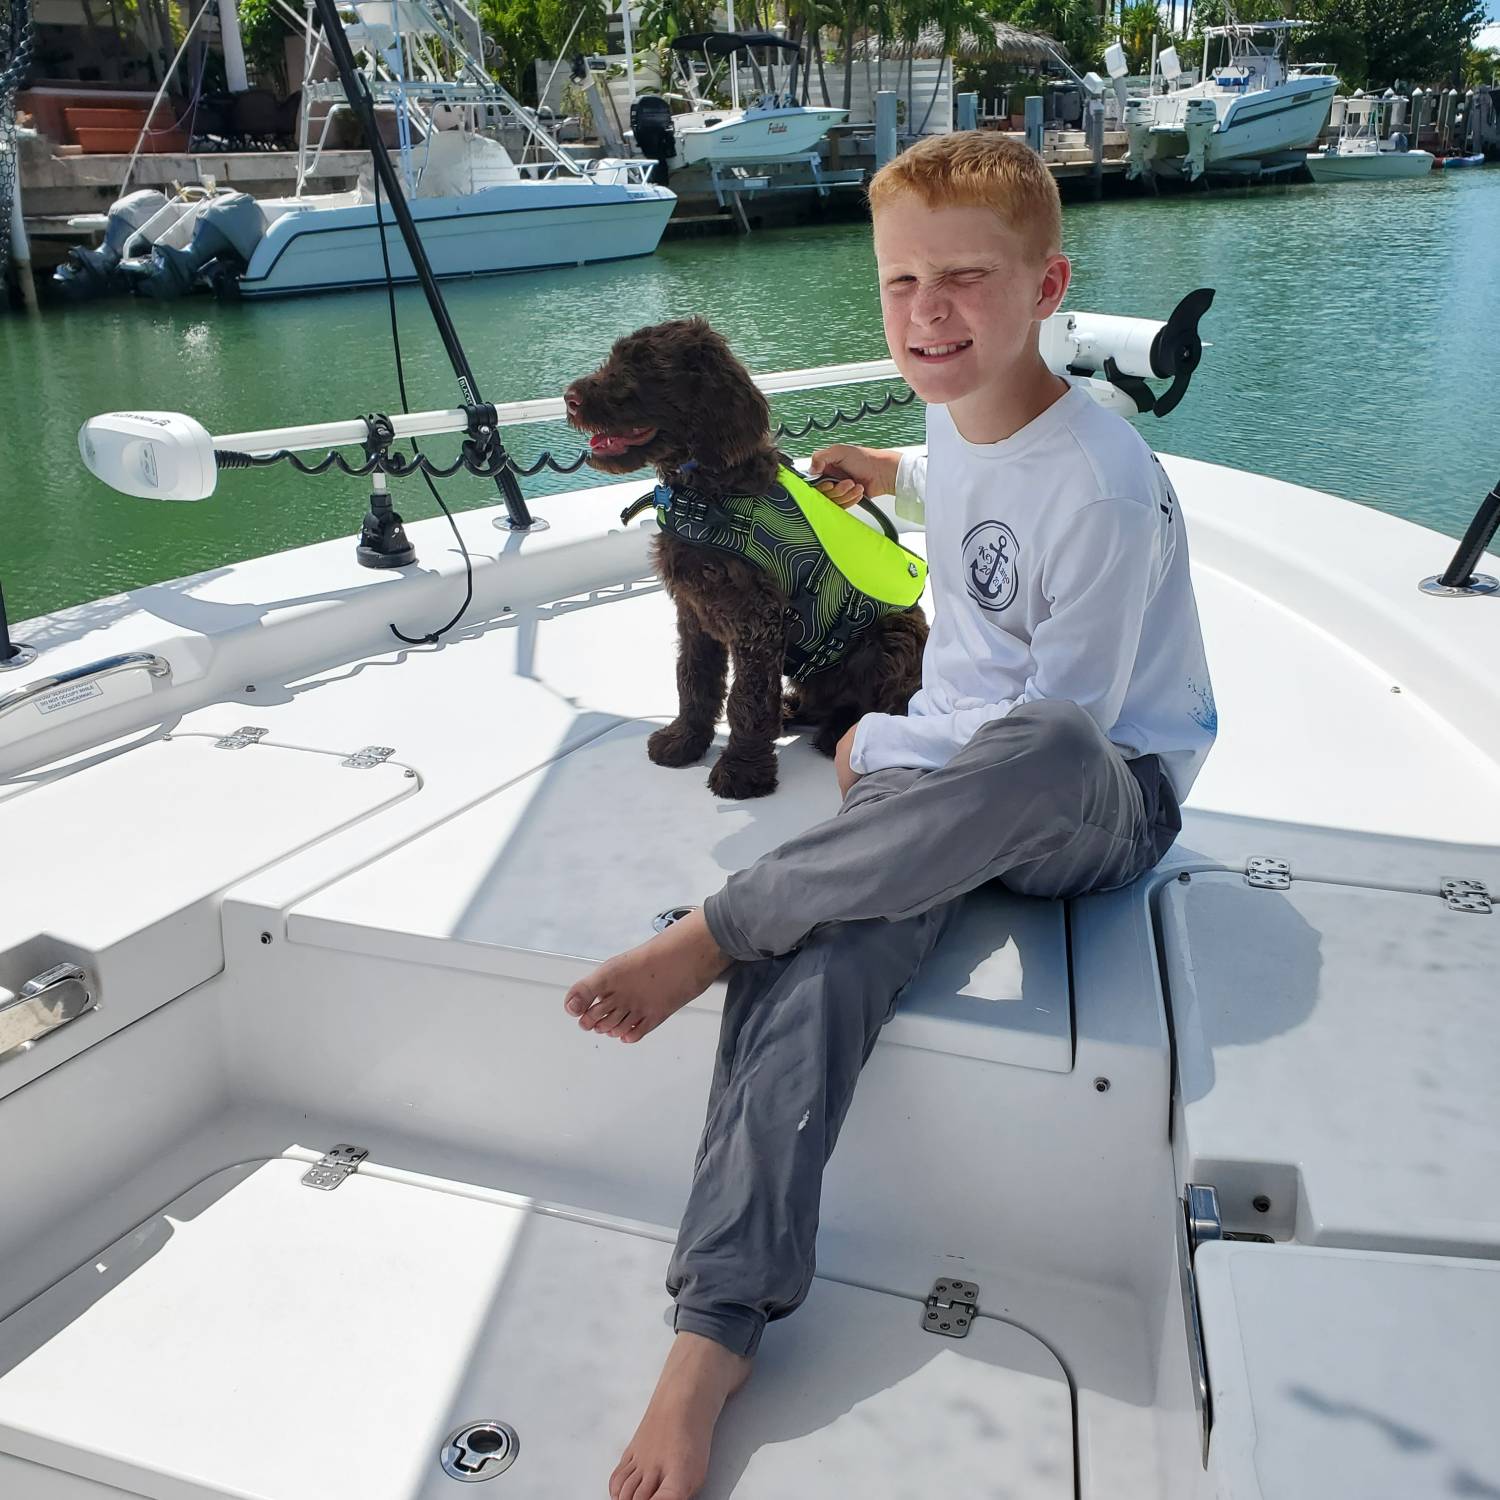 Title: My labordoodle first ride - On board their Sportsman Masters 267 Bay Boat - Location: Marathon key. Participating in the Photo Contest #SportsmanSeptember